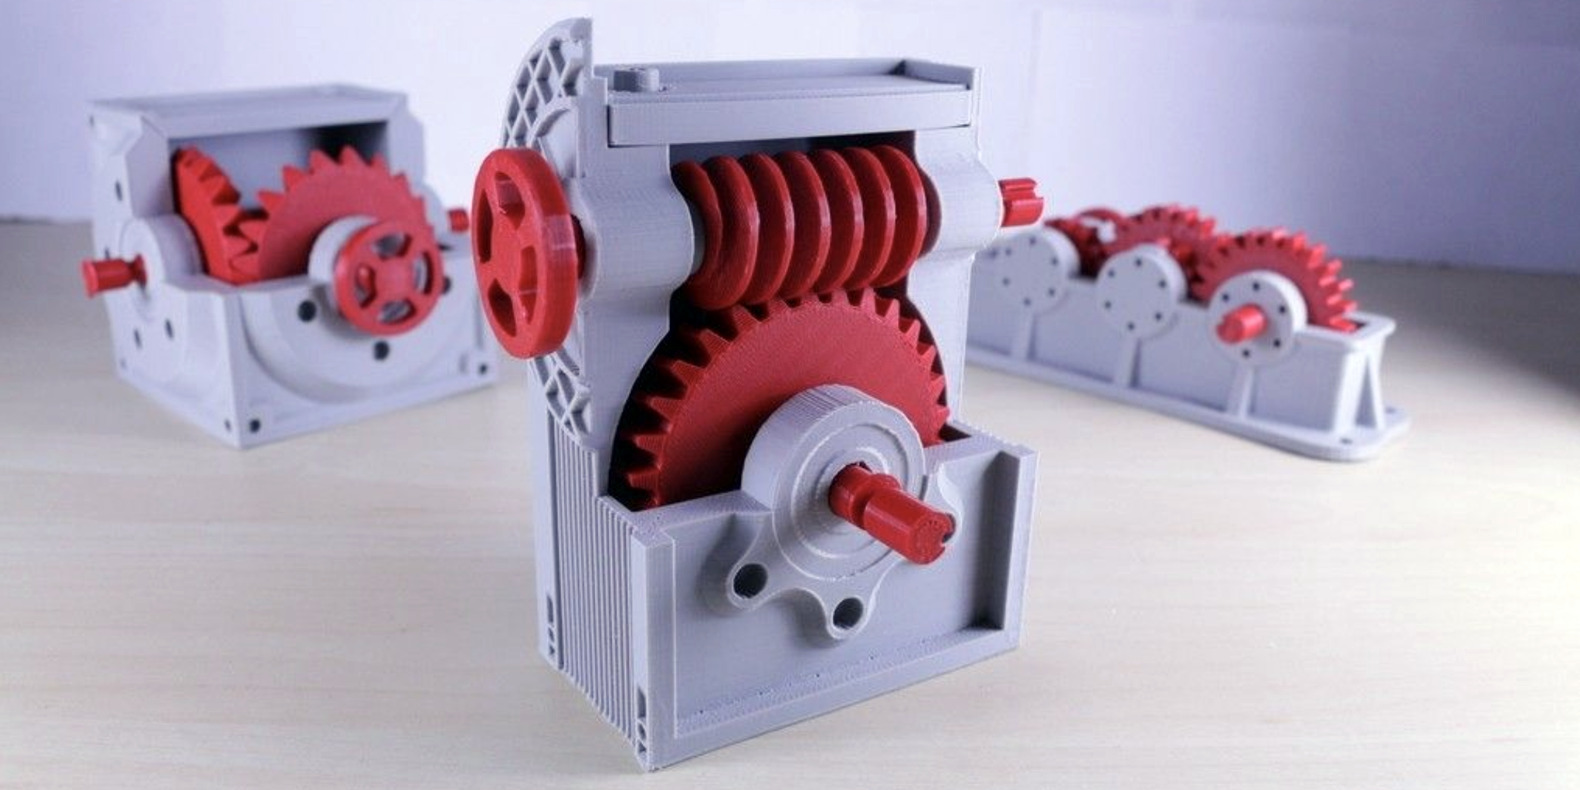 Find here a selection of the best 3D models of 3D printable mechanical files